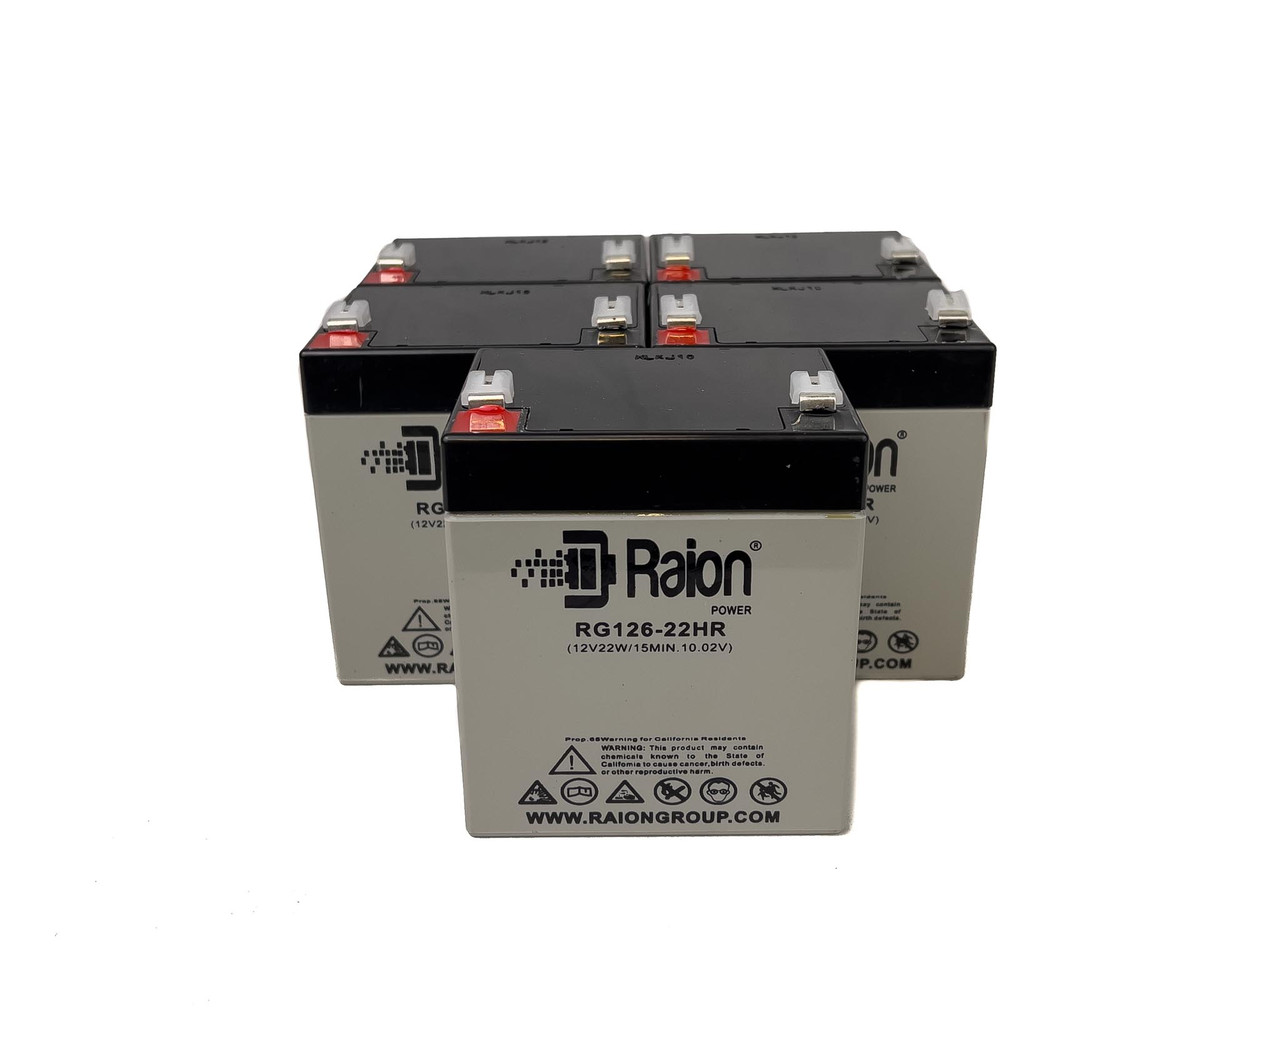 Raion Power RG126-22HR 12V 5.5.5Ah Replacement Battery Cartridge for Baace CB1223W - 5 Pack